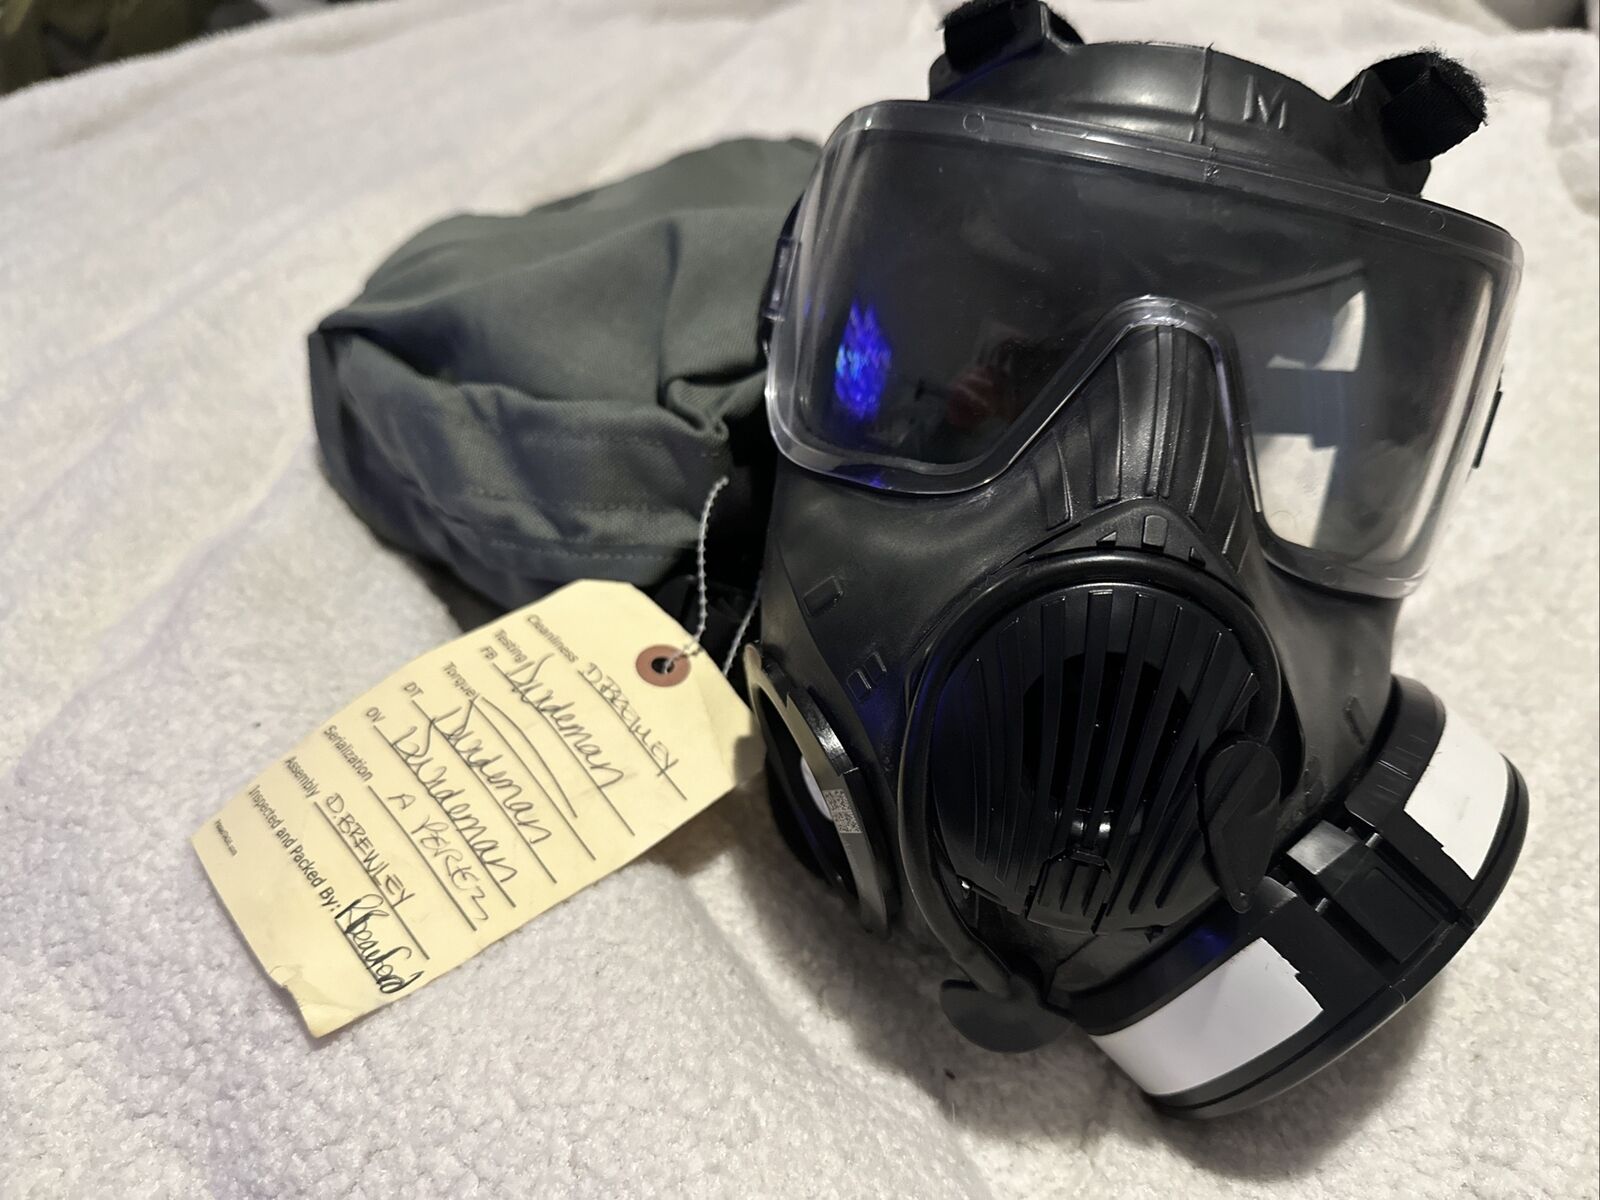 MCU-2/P Protective Mask US Military Gas Mask CBRN Mask With Operating Cards